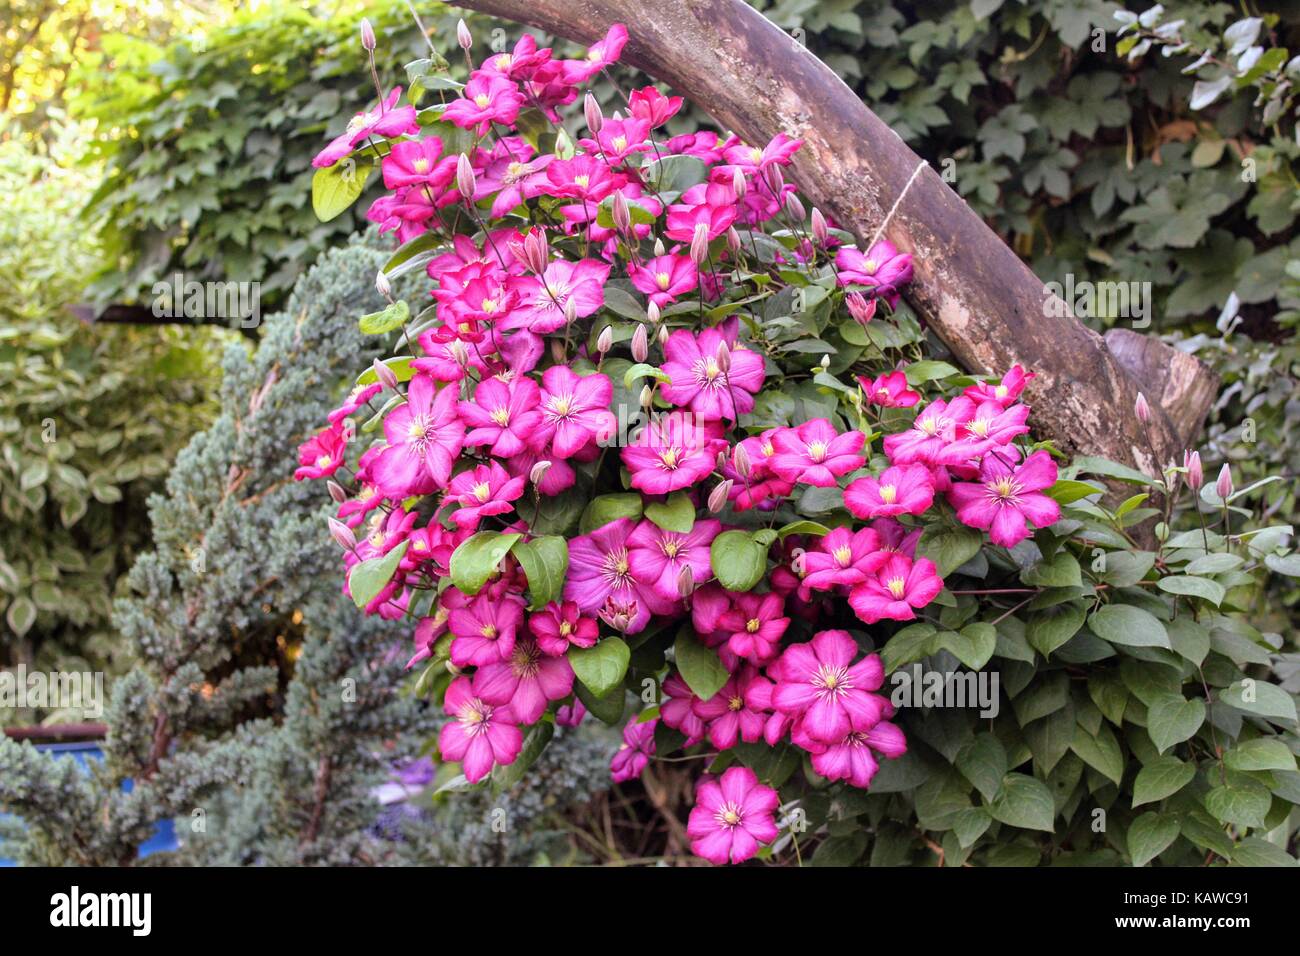 Clematis flowers tied to the trunk of a tree in a private garden. Stock Photo